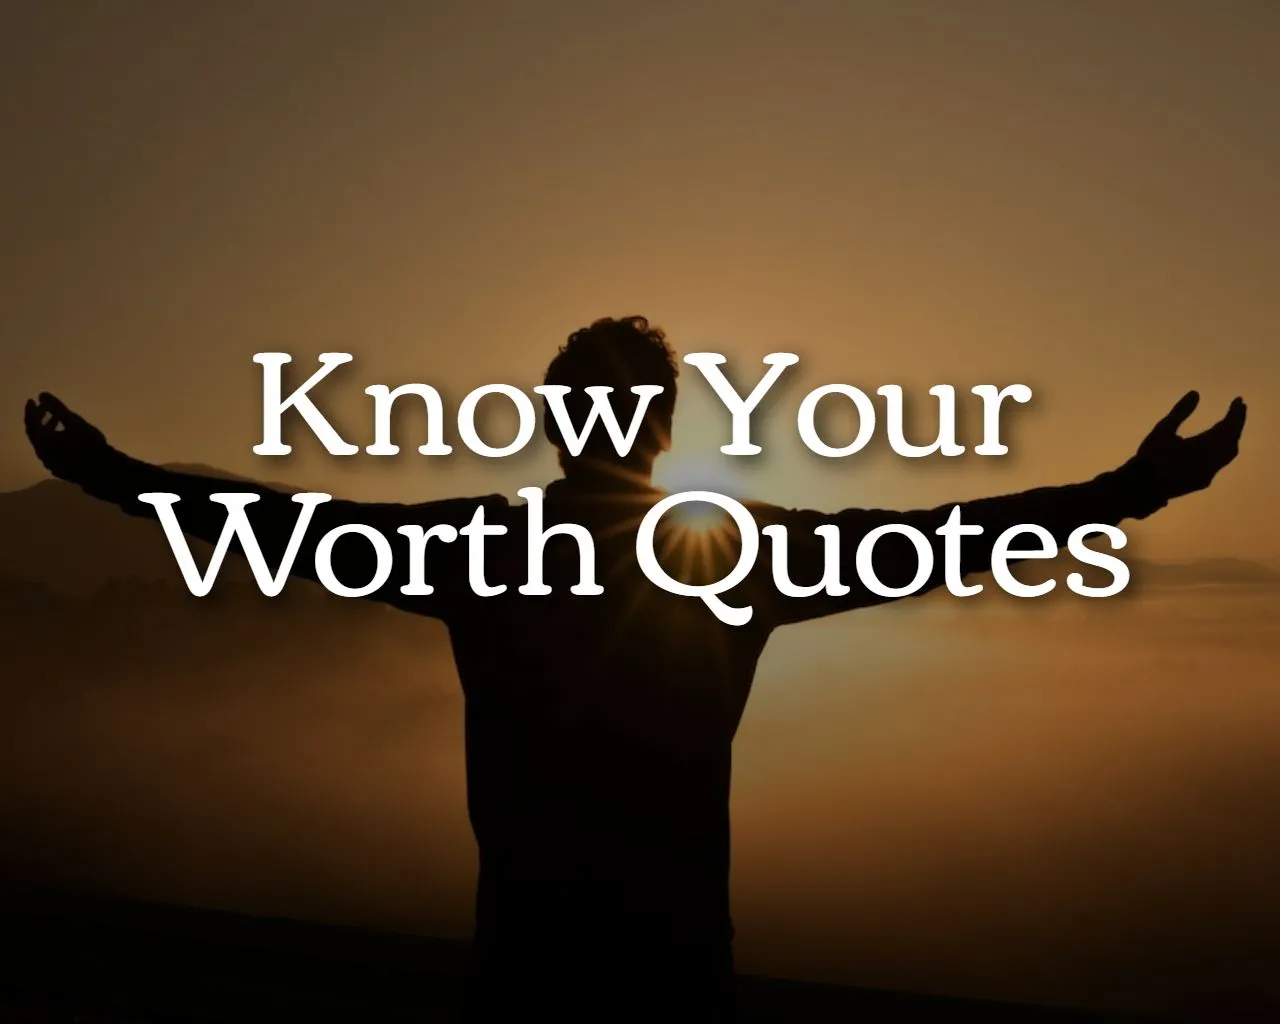 Know your Worth Quotes